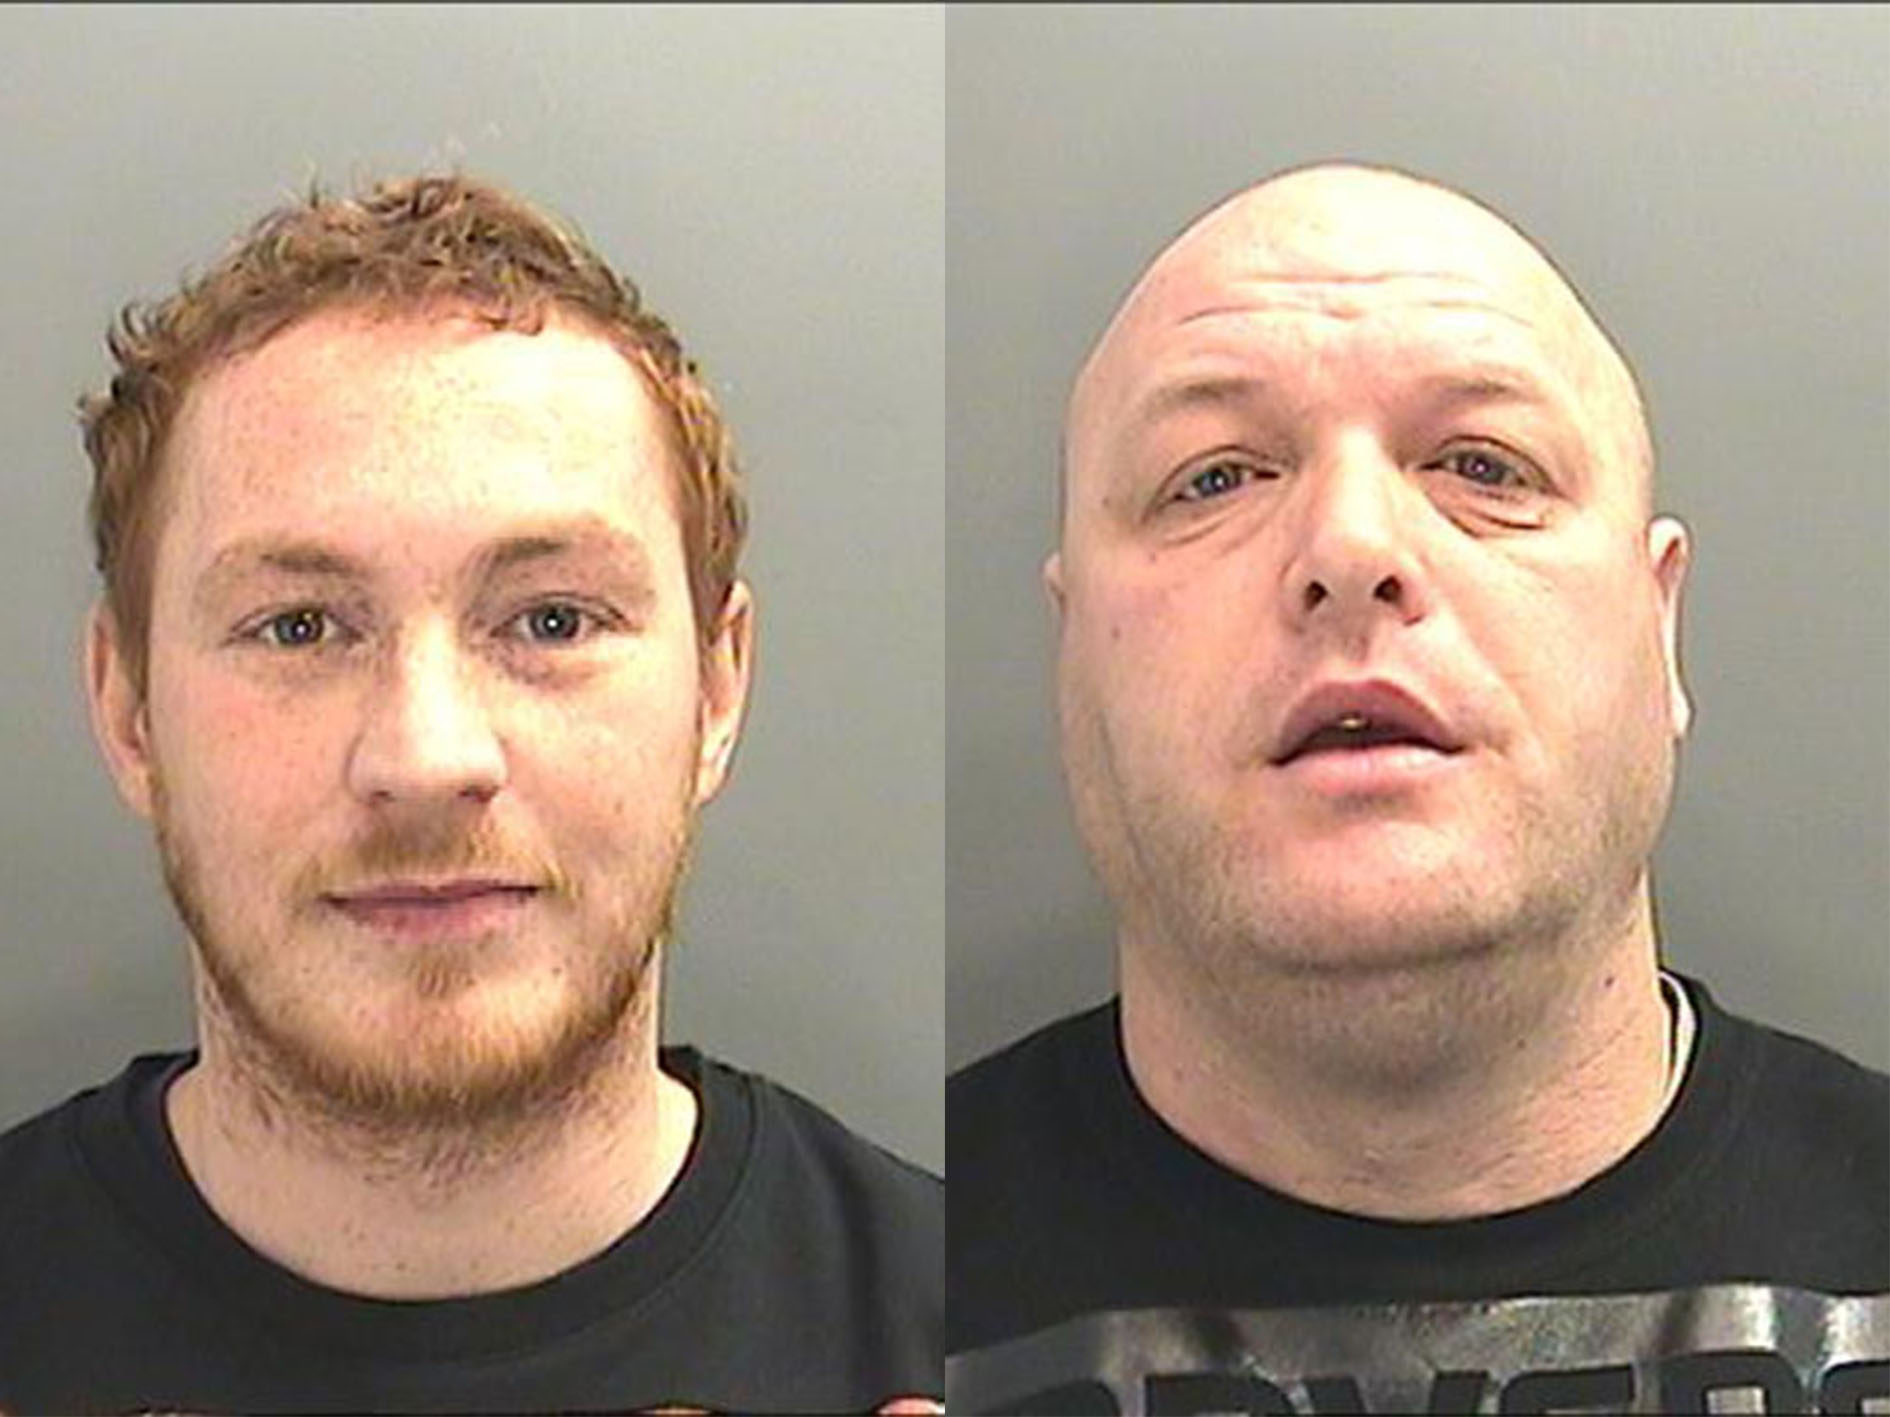 Daniel Gordon (left), 28, was jailed for 20 months and Dean Cronin (right), 41, was jailed for three and a half years. (Credit: South Wales Police)